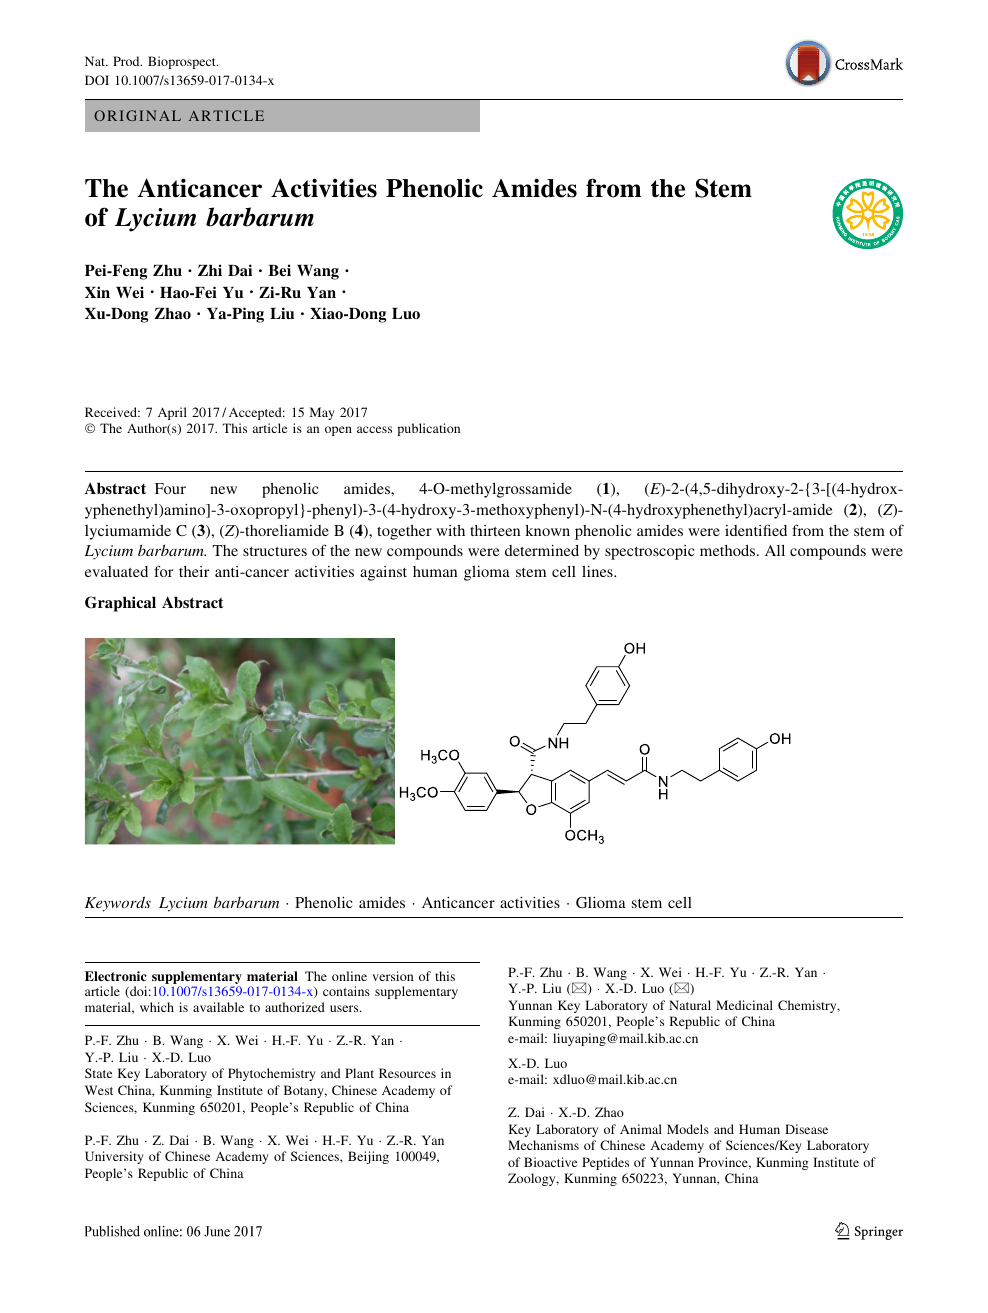 The Anticancer Activities Phenolic Amides From The Stem Of Lycium Barbarum Topic Of Research Paper In Chemical Sciences Download Scholarly Article Pdf And Read For Free On Cyberleninka Open Science Hub